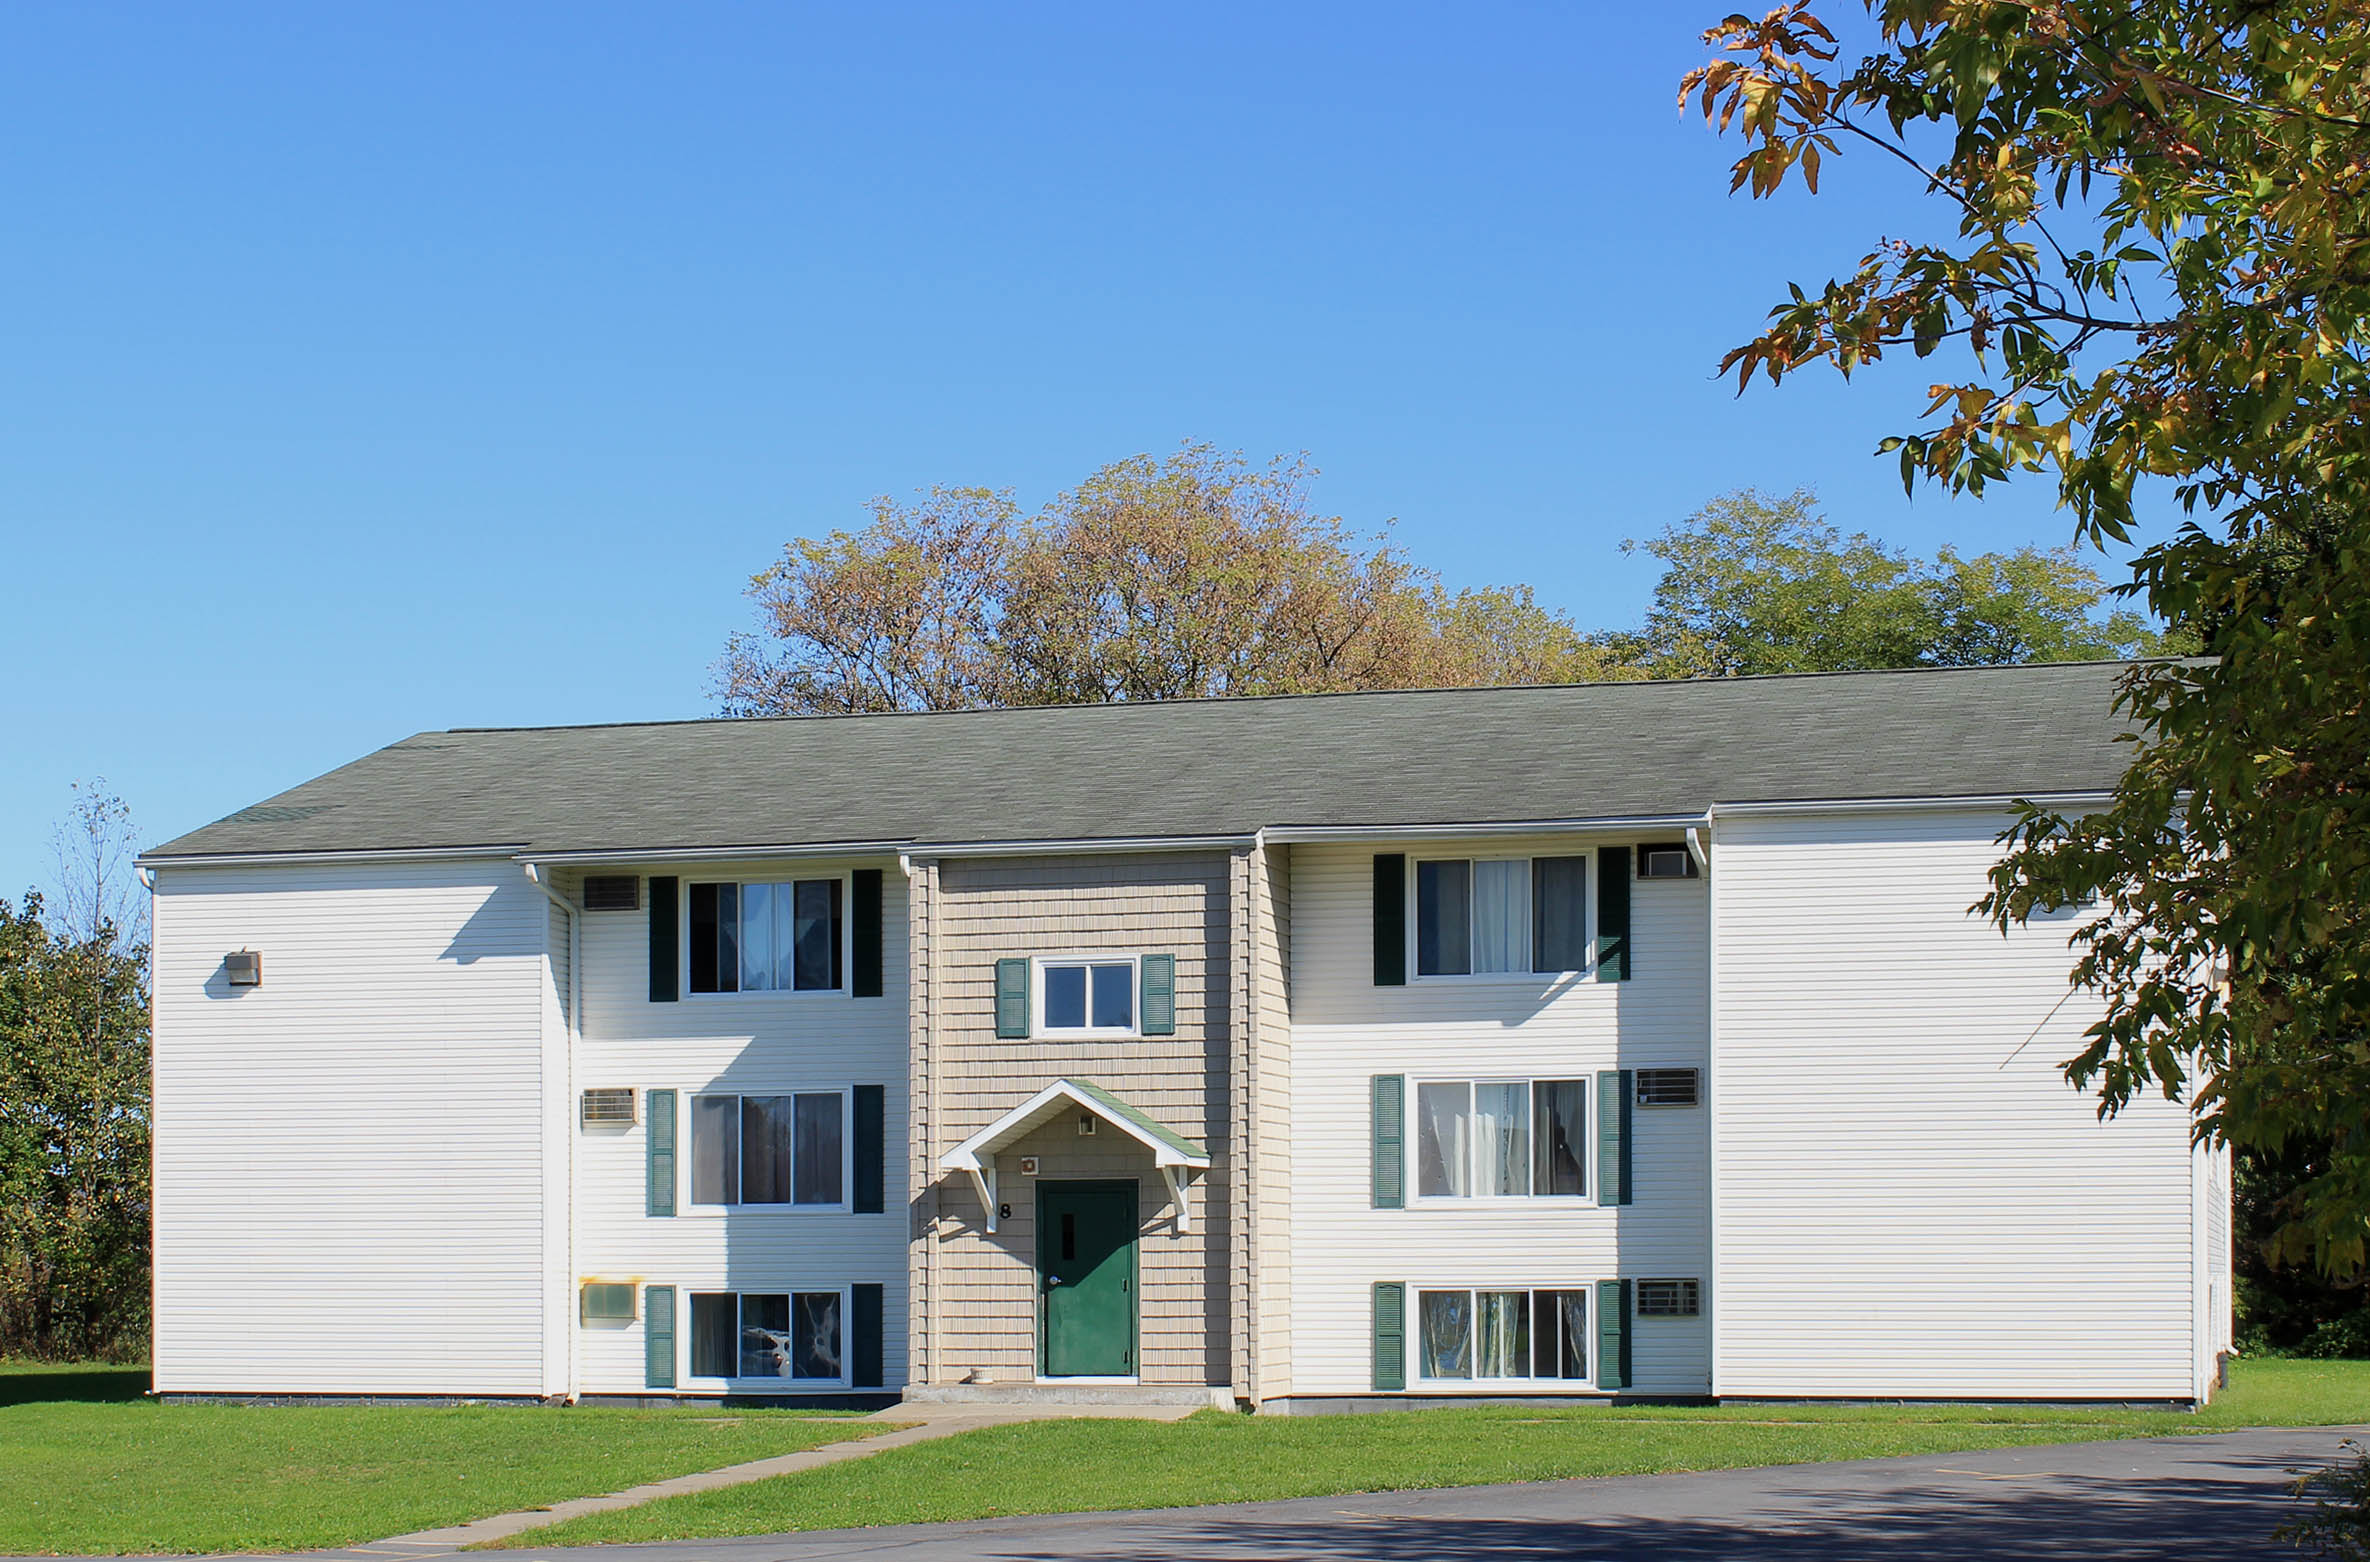 property management company client list syracuse ny image of stevens manor apartments